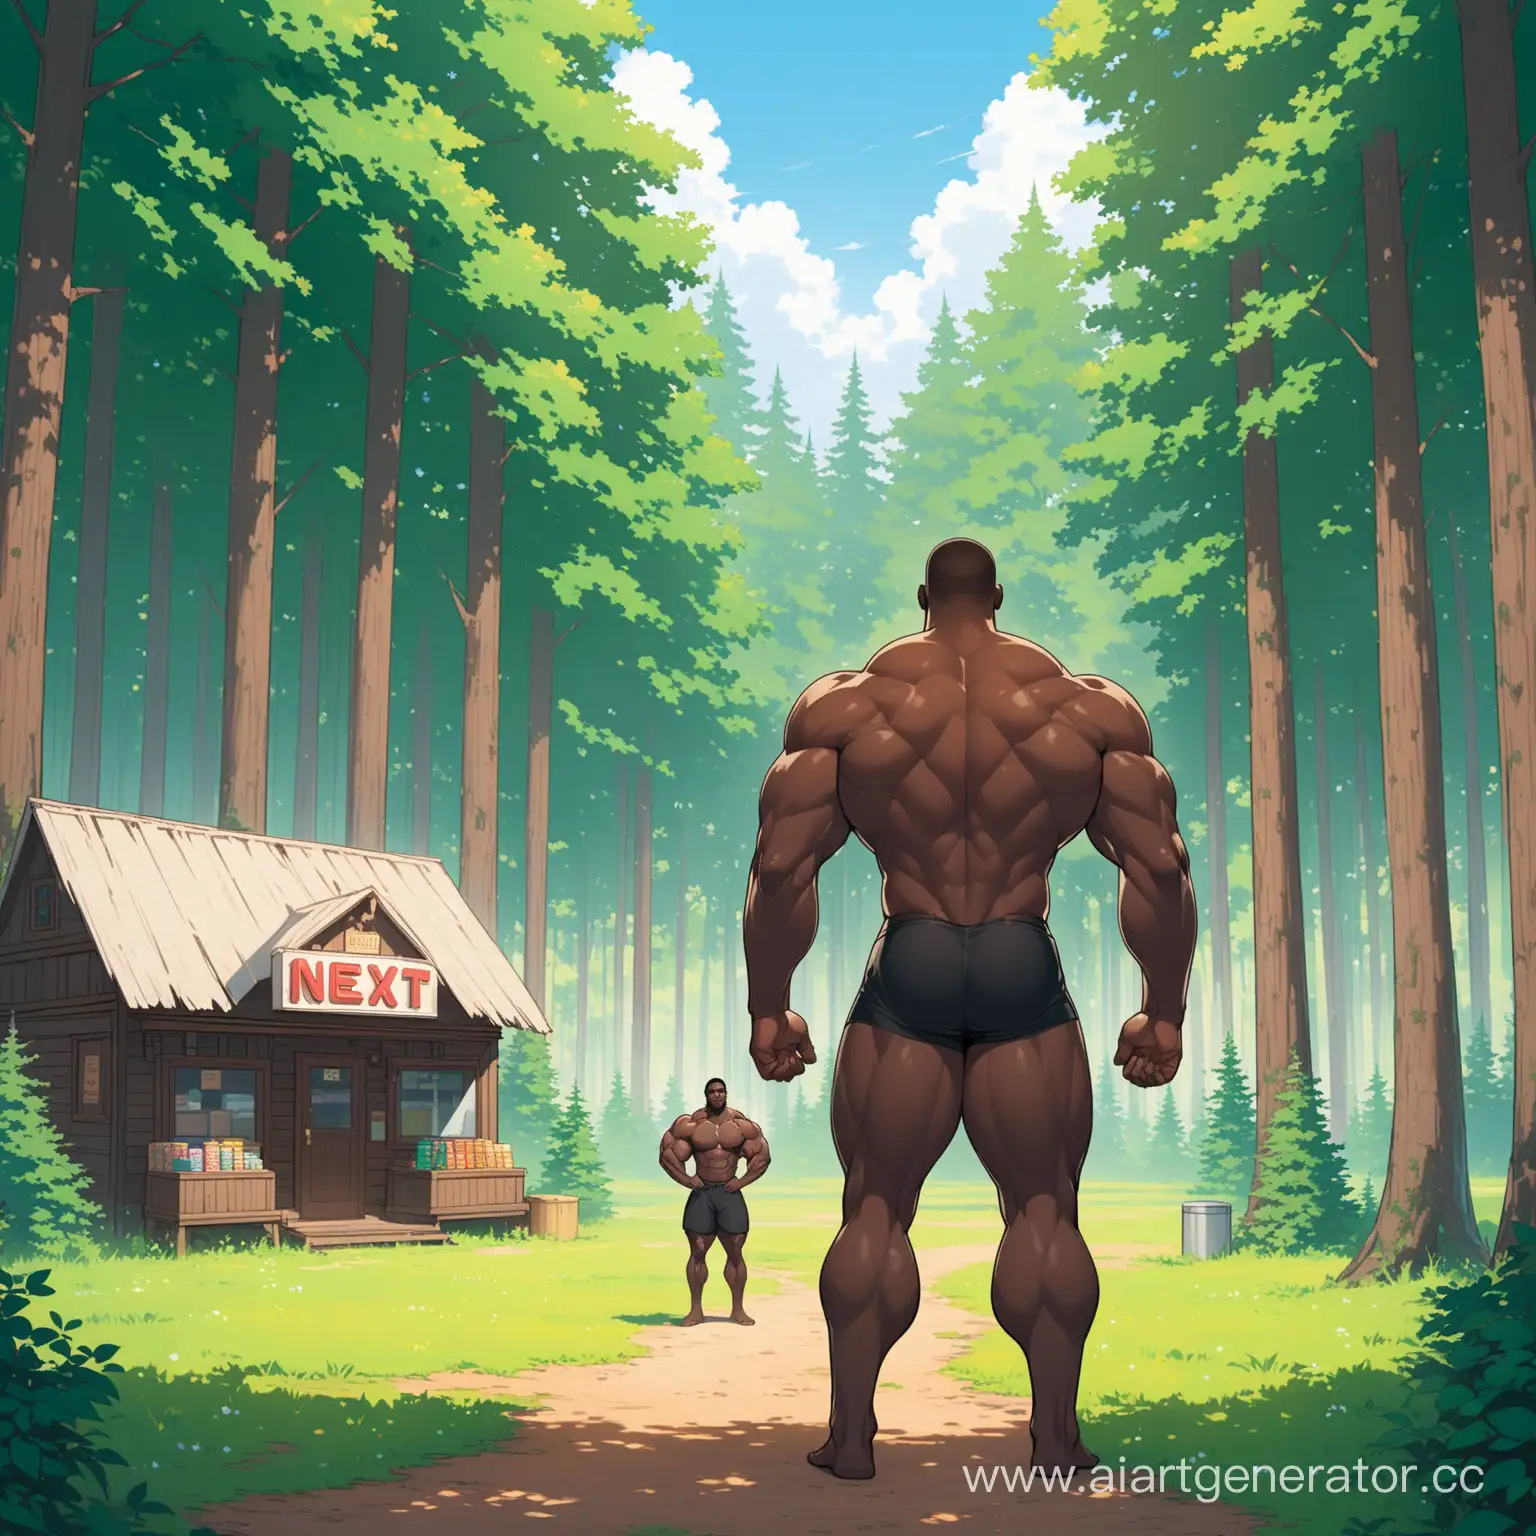 Muscular-African-American-Man-in-Woods-Clearing-with-Quaint-Store